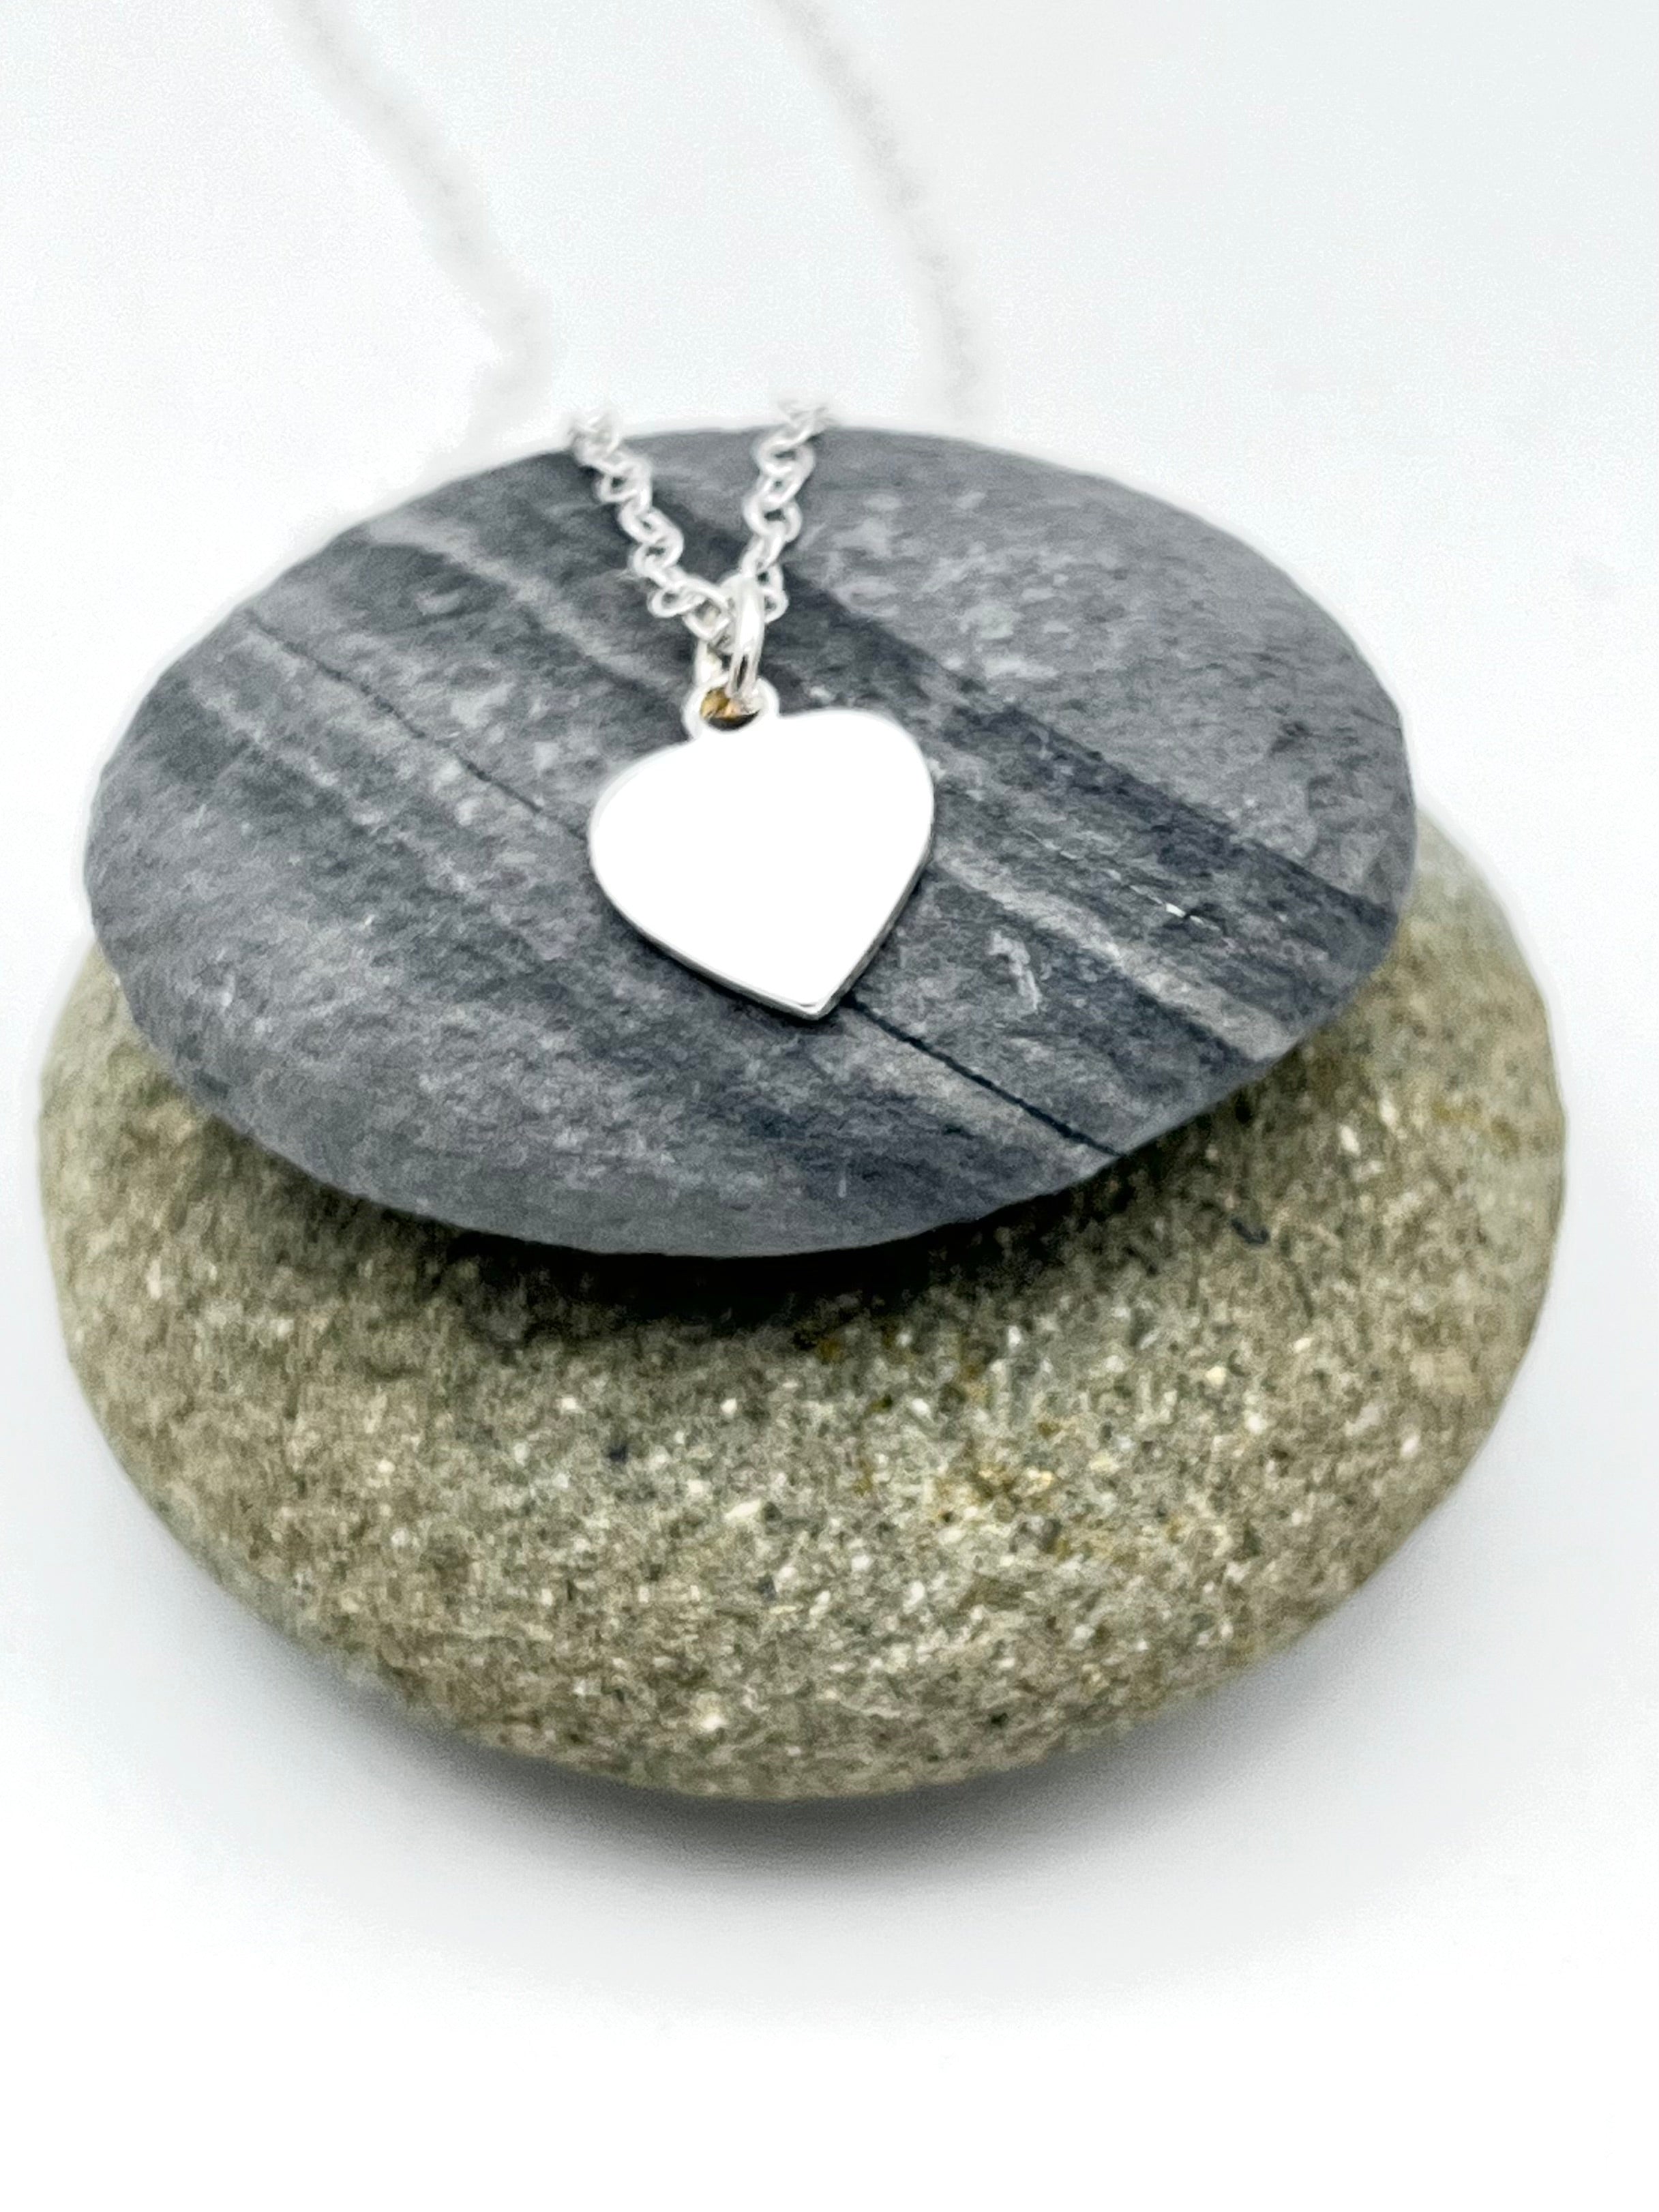 Heart pendant 10mm wide polished finish on 16" trace chain